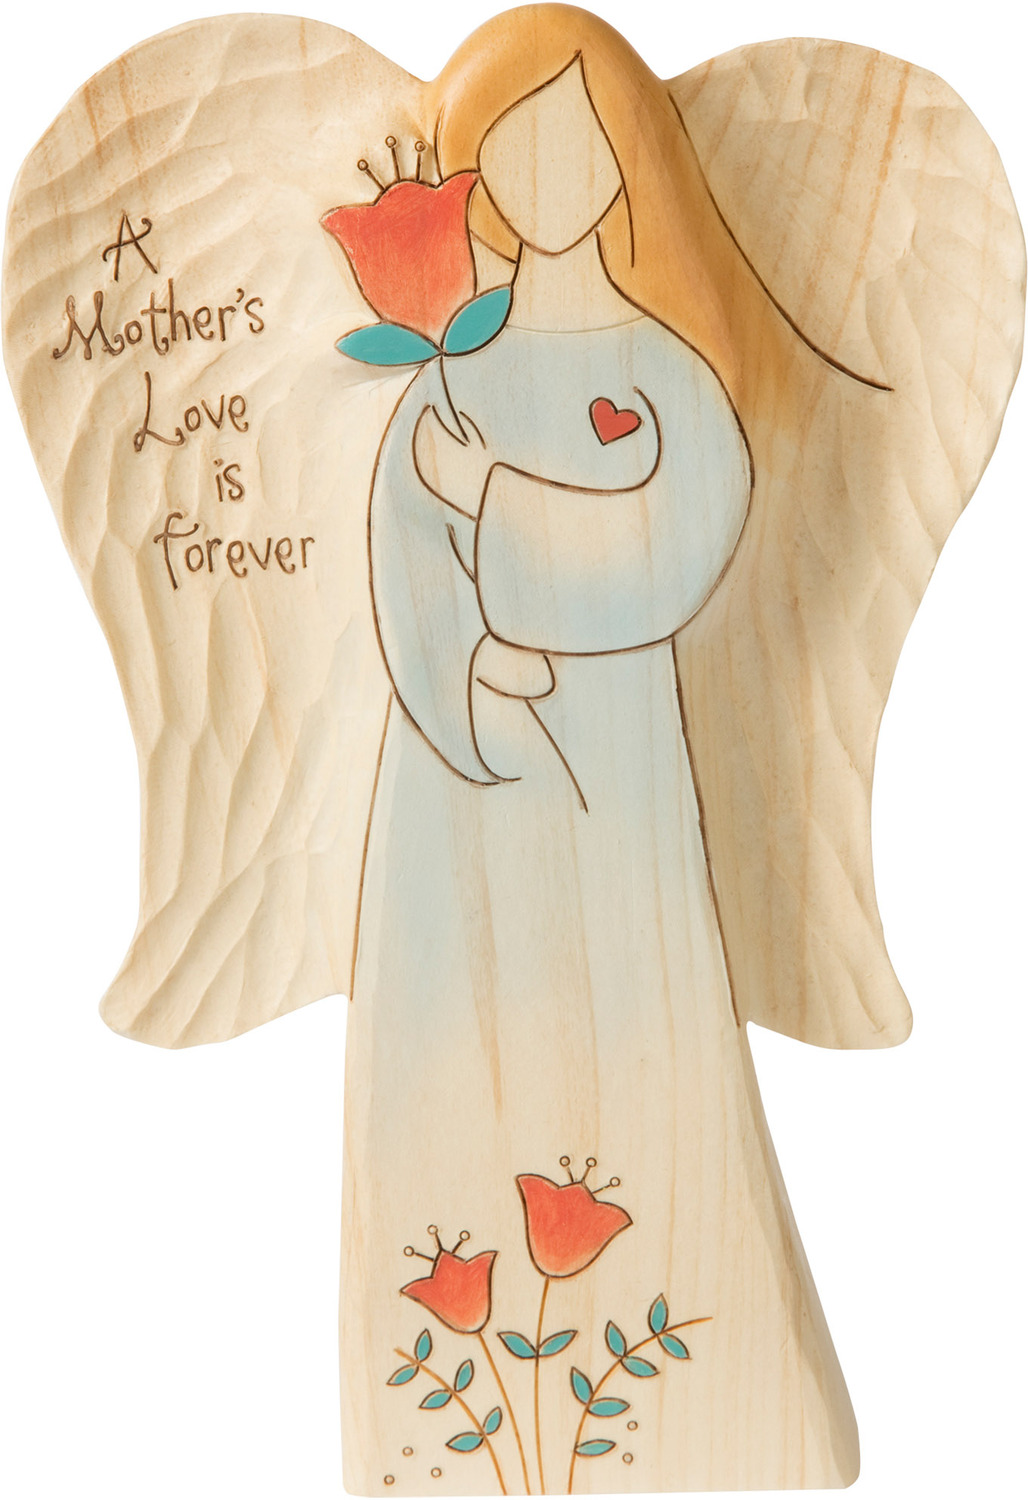 Mother's Love by Heavenly Woods - Mother's Love - 7" Angel Holding Flower